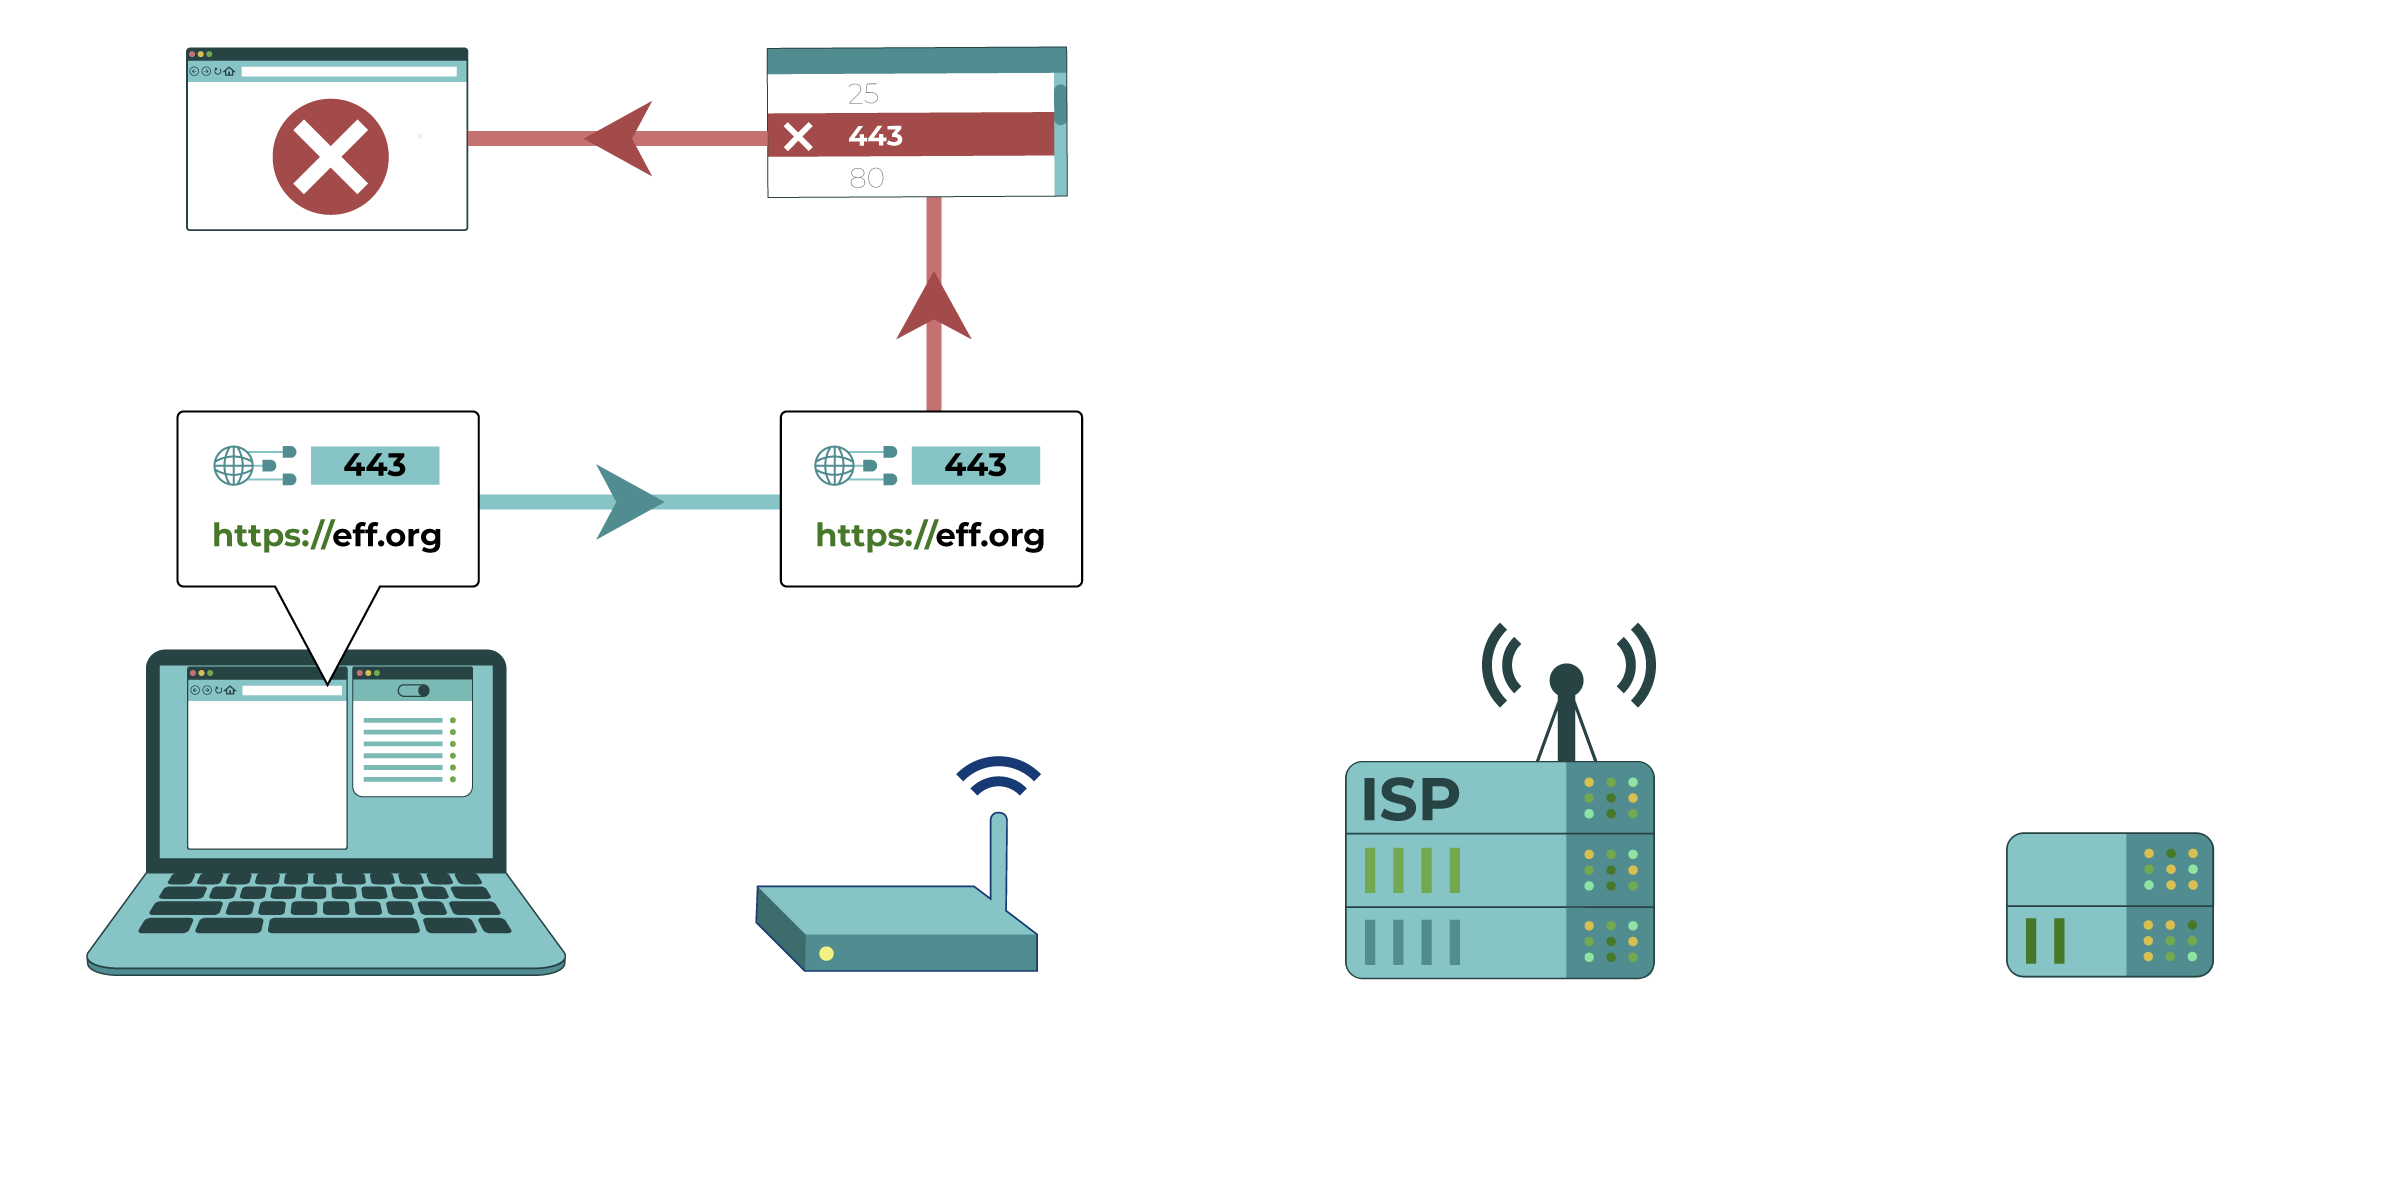 In this diagram, the router recognizes a computer attempting to connect to an HTTPS site, which uses Port 443. Port 443 is on this router’s list of blocked protocols.